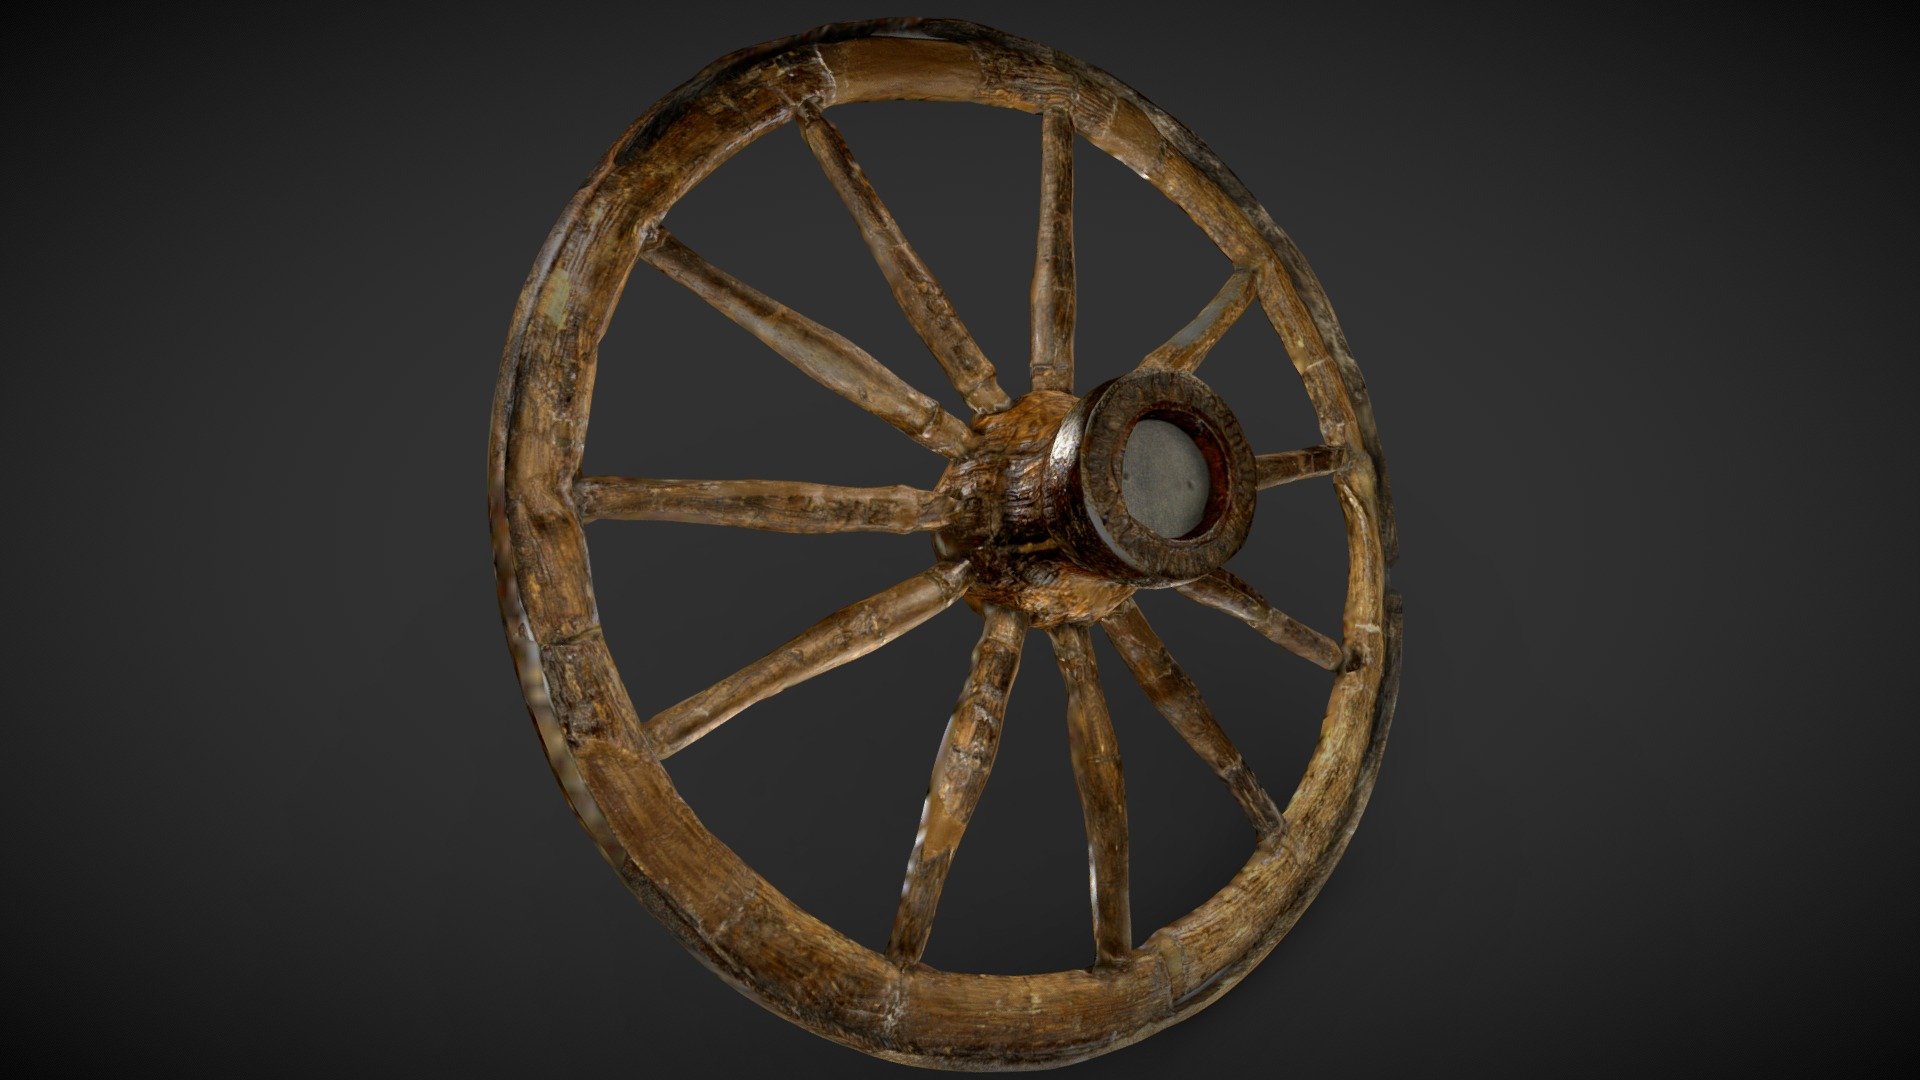 This is a wooden wheel found at Bar Hill fort along the Antonine Wall. It has eleven spokes, a nave of elm and hubs that are lined with iron.

The Antonine Wall stretched right across Scotland, from the Clyde to the Forth. Constructed around 142 AD, and occupied for only 20 years, the remains of its ramparts, steep ditches, forts and bathhouses are still visible today.

More information on the World Heritage Site is available on www.antoninewall.org

Reference: F.1936.91 - Wheel, Bar Hill, Antonine Wall - 3D model by Historic Environment Scotland (@HistoricEnvironmentScotland) 3d model